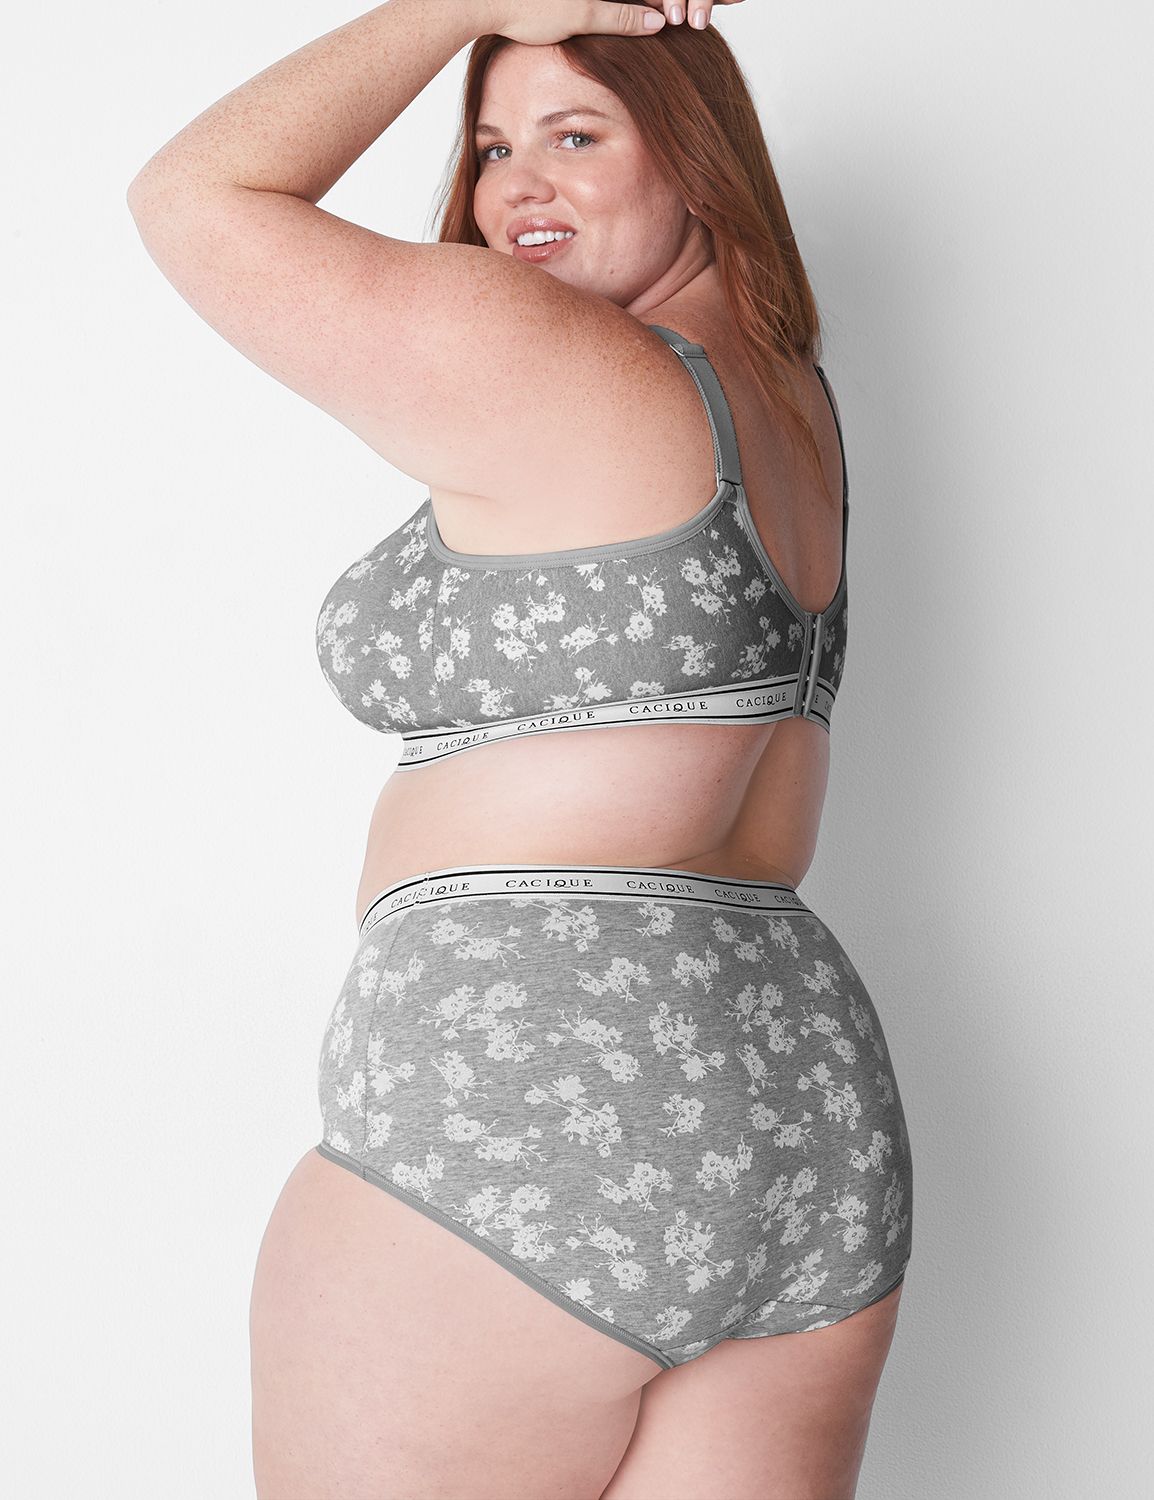 Lane Bryant - Hey, dream duo ☁️ The Cotton Unlined No-Wire